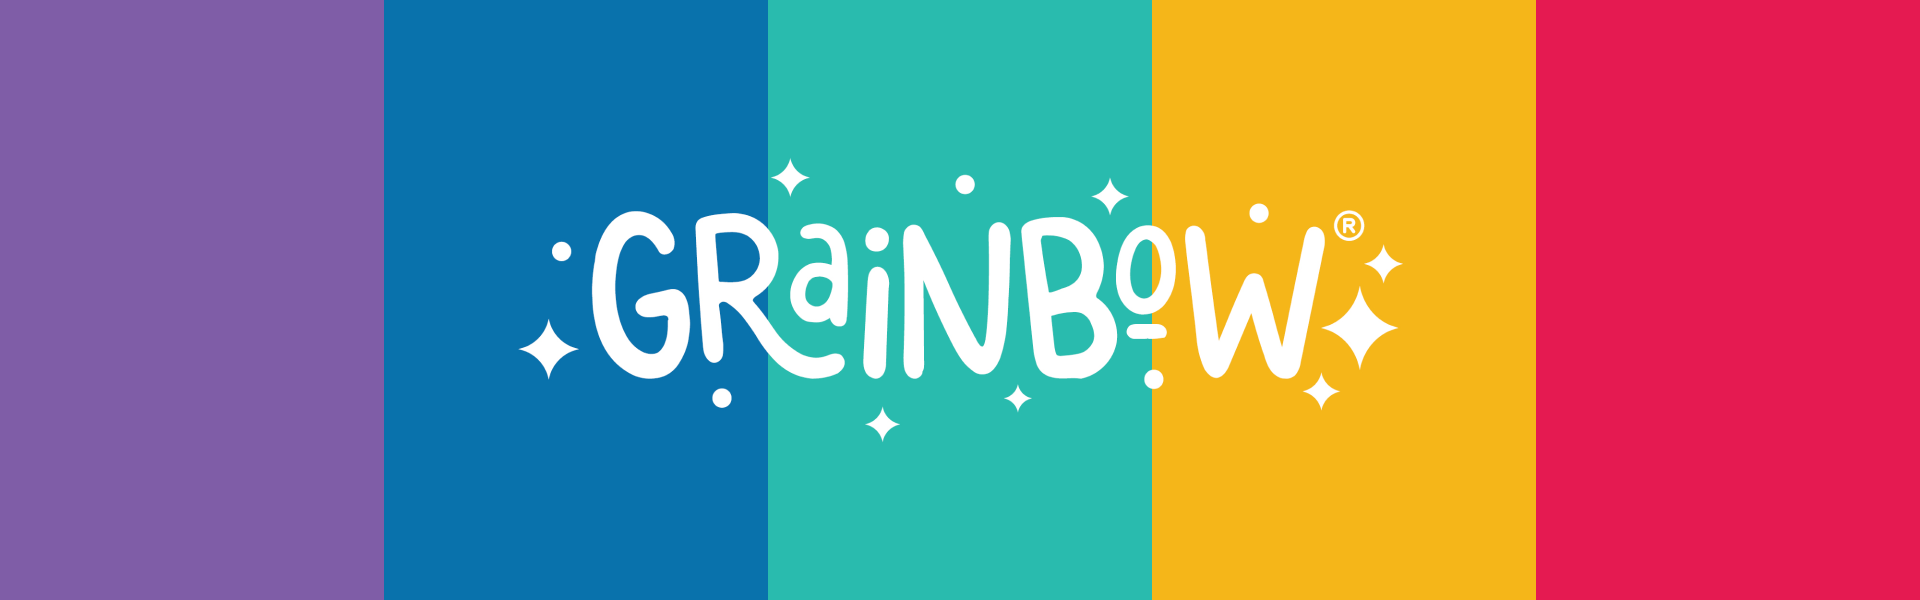 Grainbow company logo and banner, designed by MOO Marketing & Design's graphic design agency in Melbourne